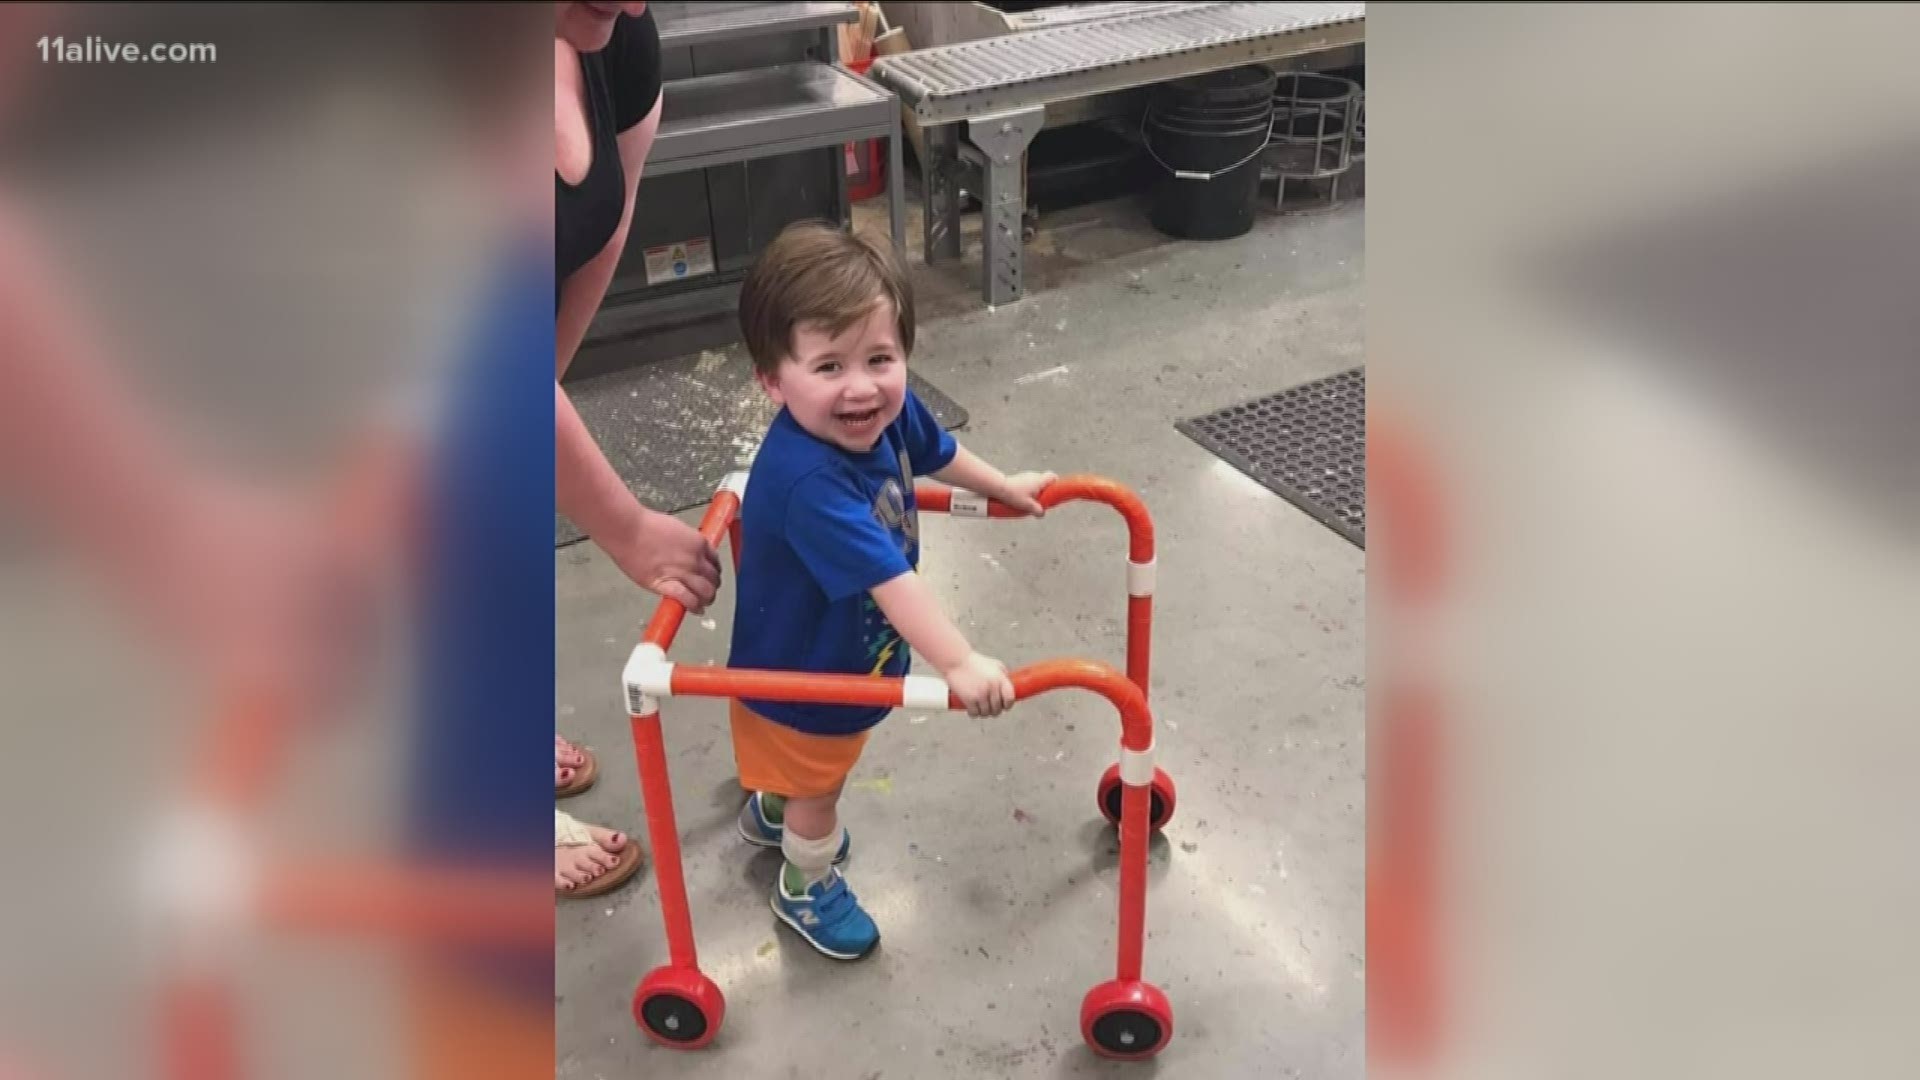 Workers at a Georgia Home Depot store came together to help a family in need.